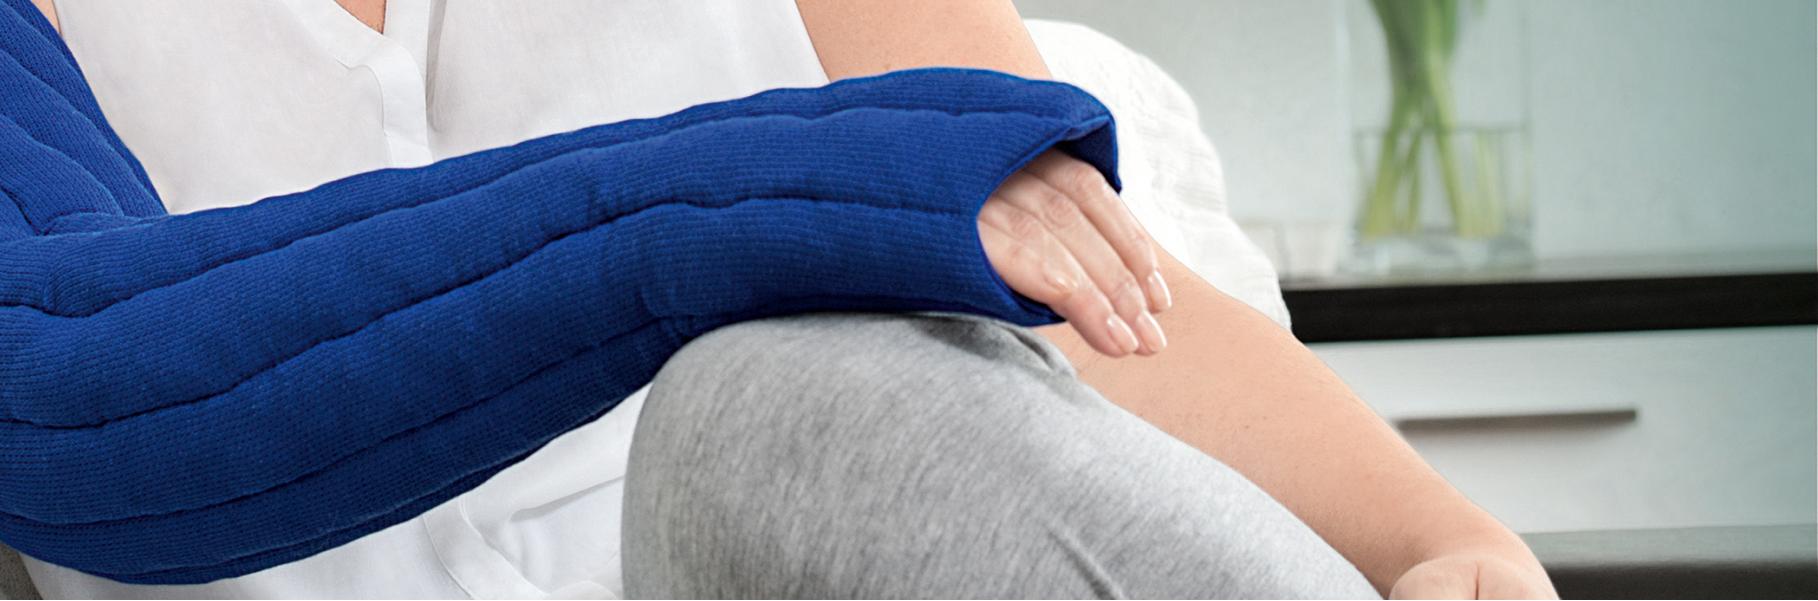 Woman's arm wearing compression sleeve